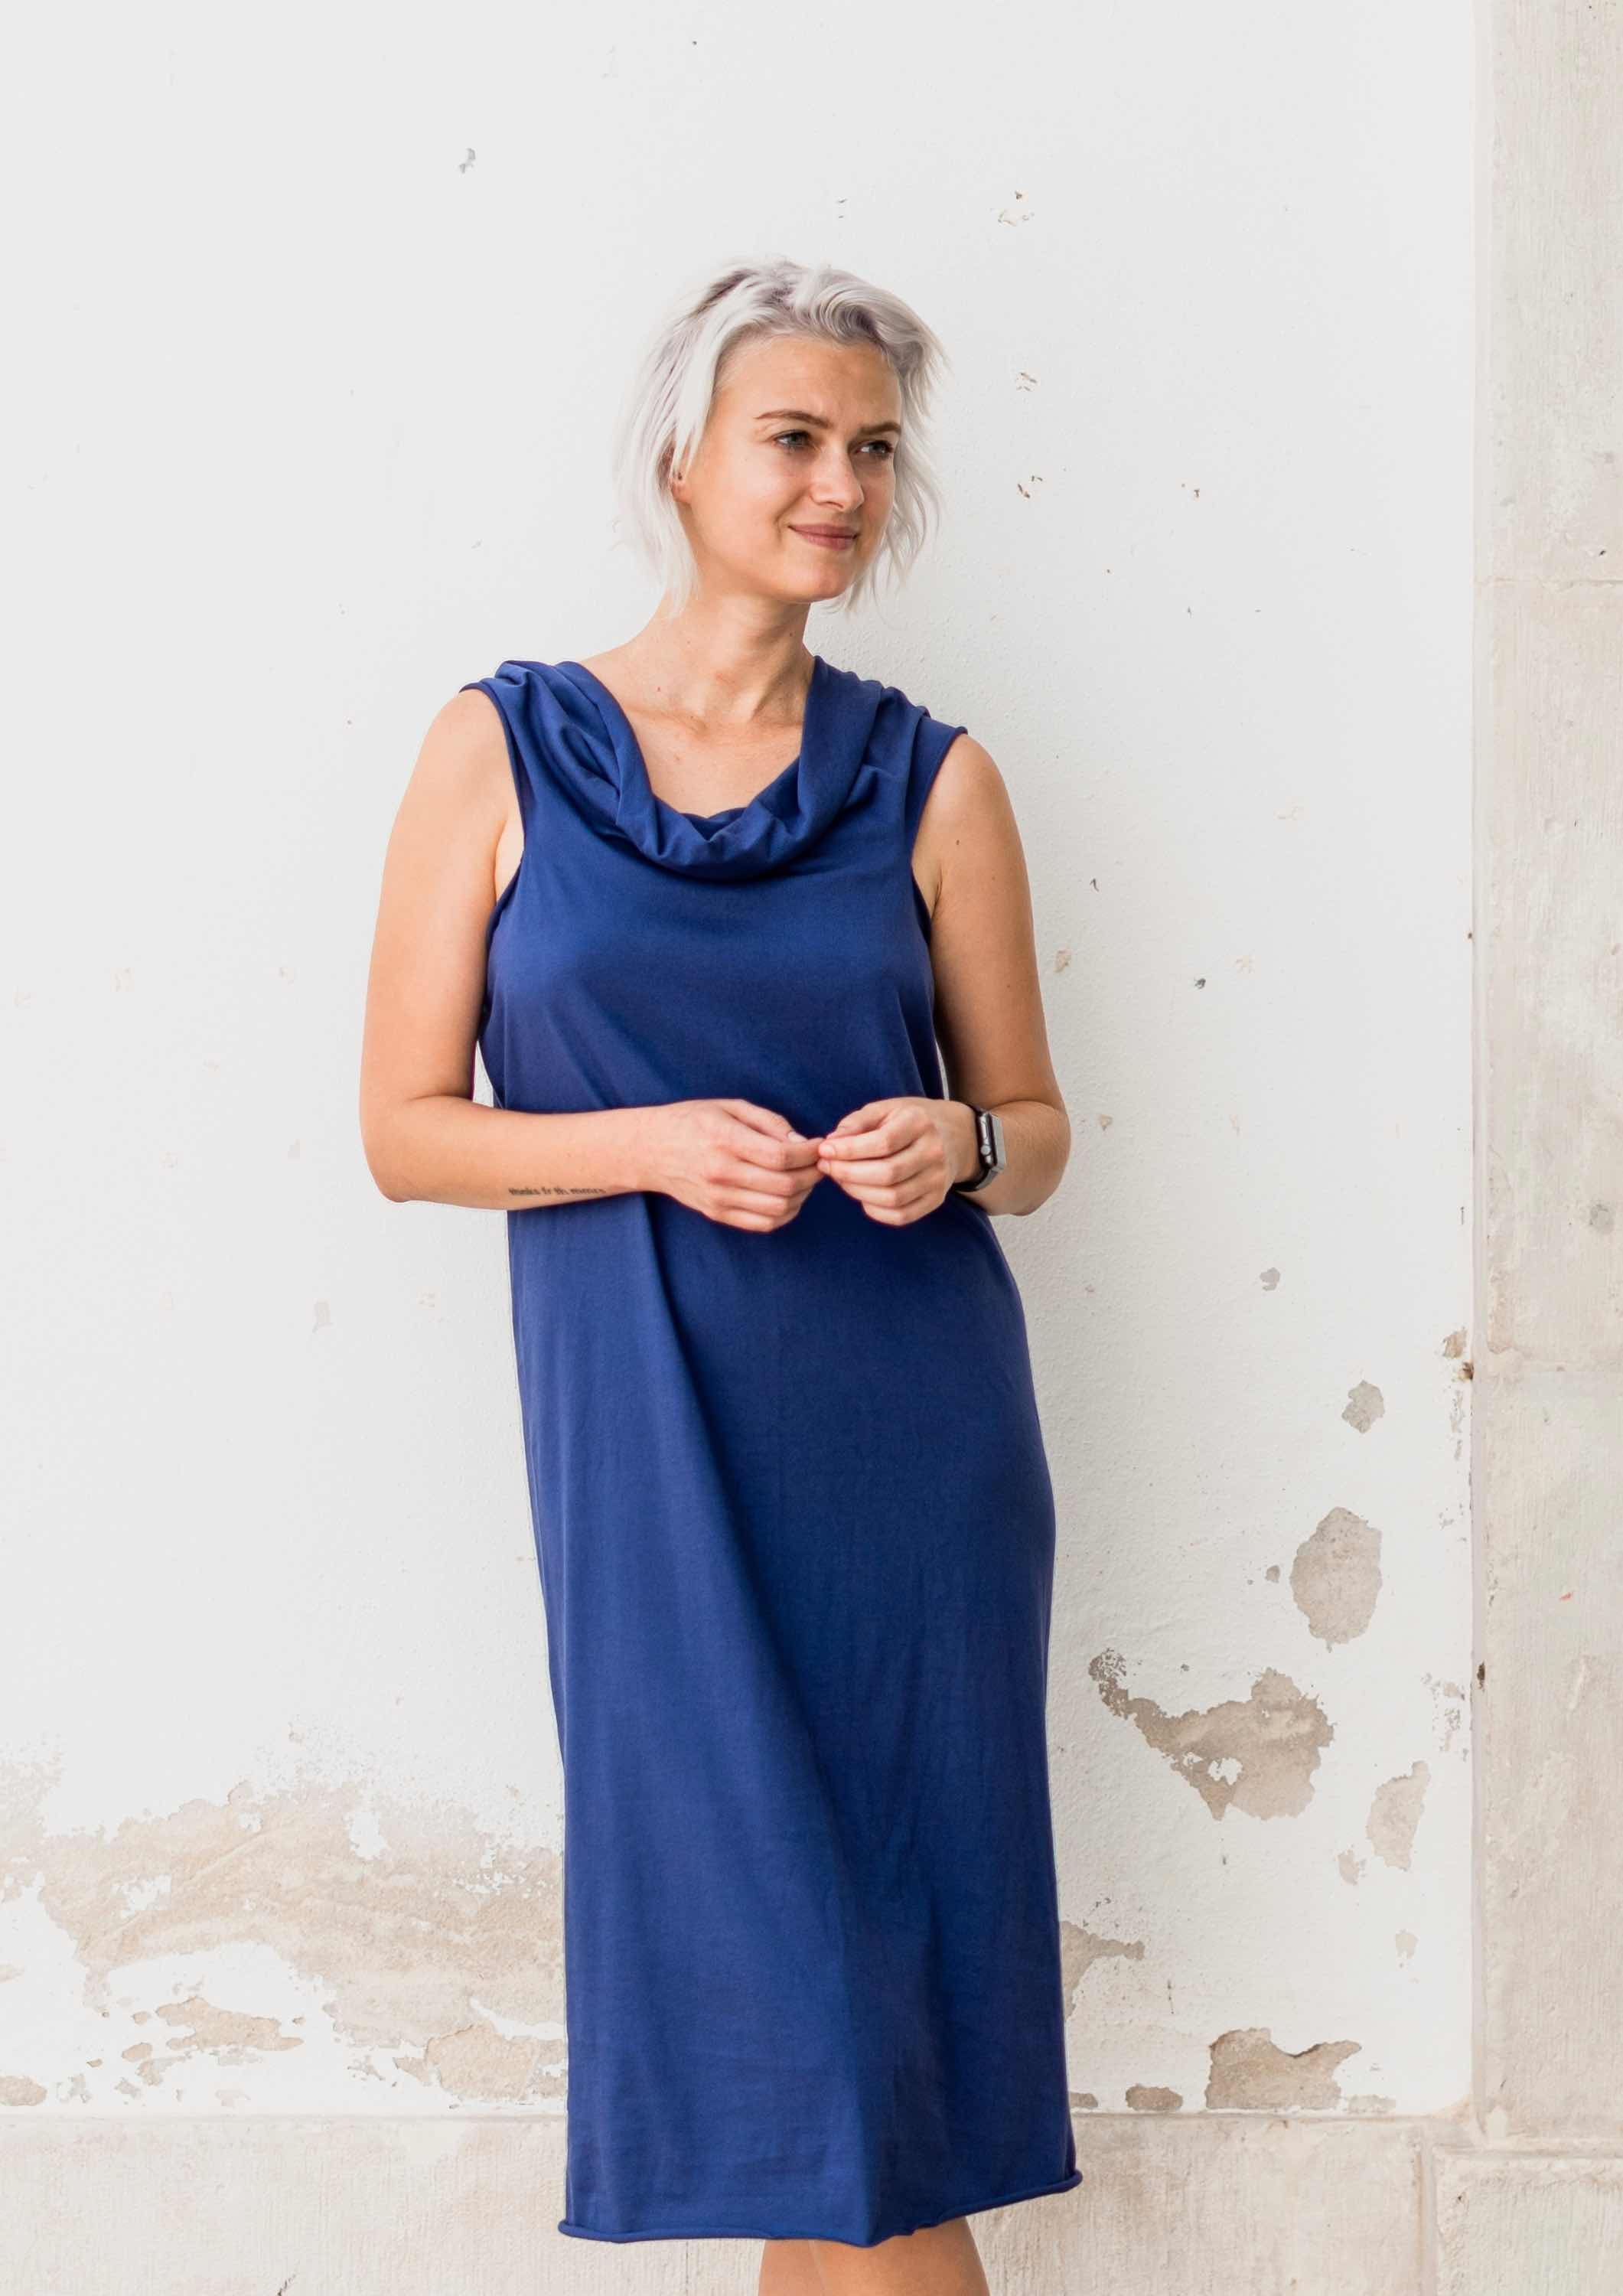 Multifunctional lightweight jersey. Can be worn as a long dress, crop top, t-shirt with scarf or neckholder. In the colour blueberry. Seamless.